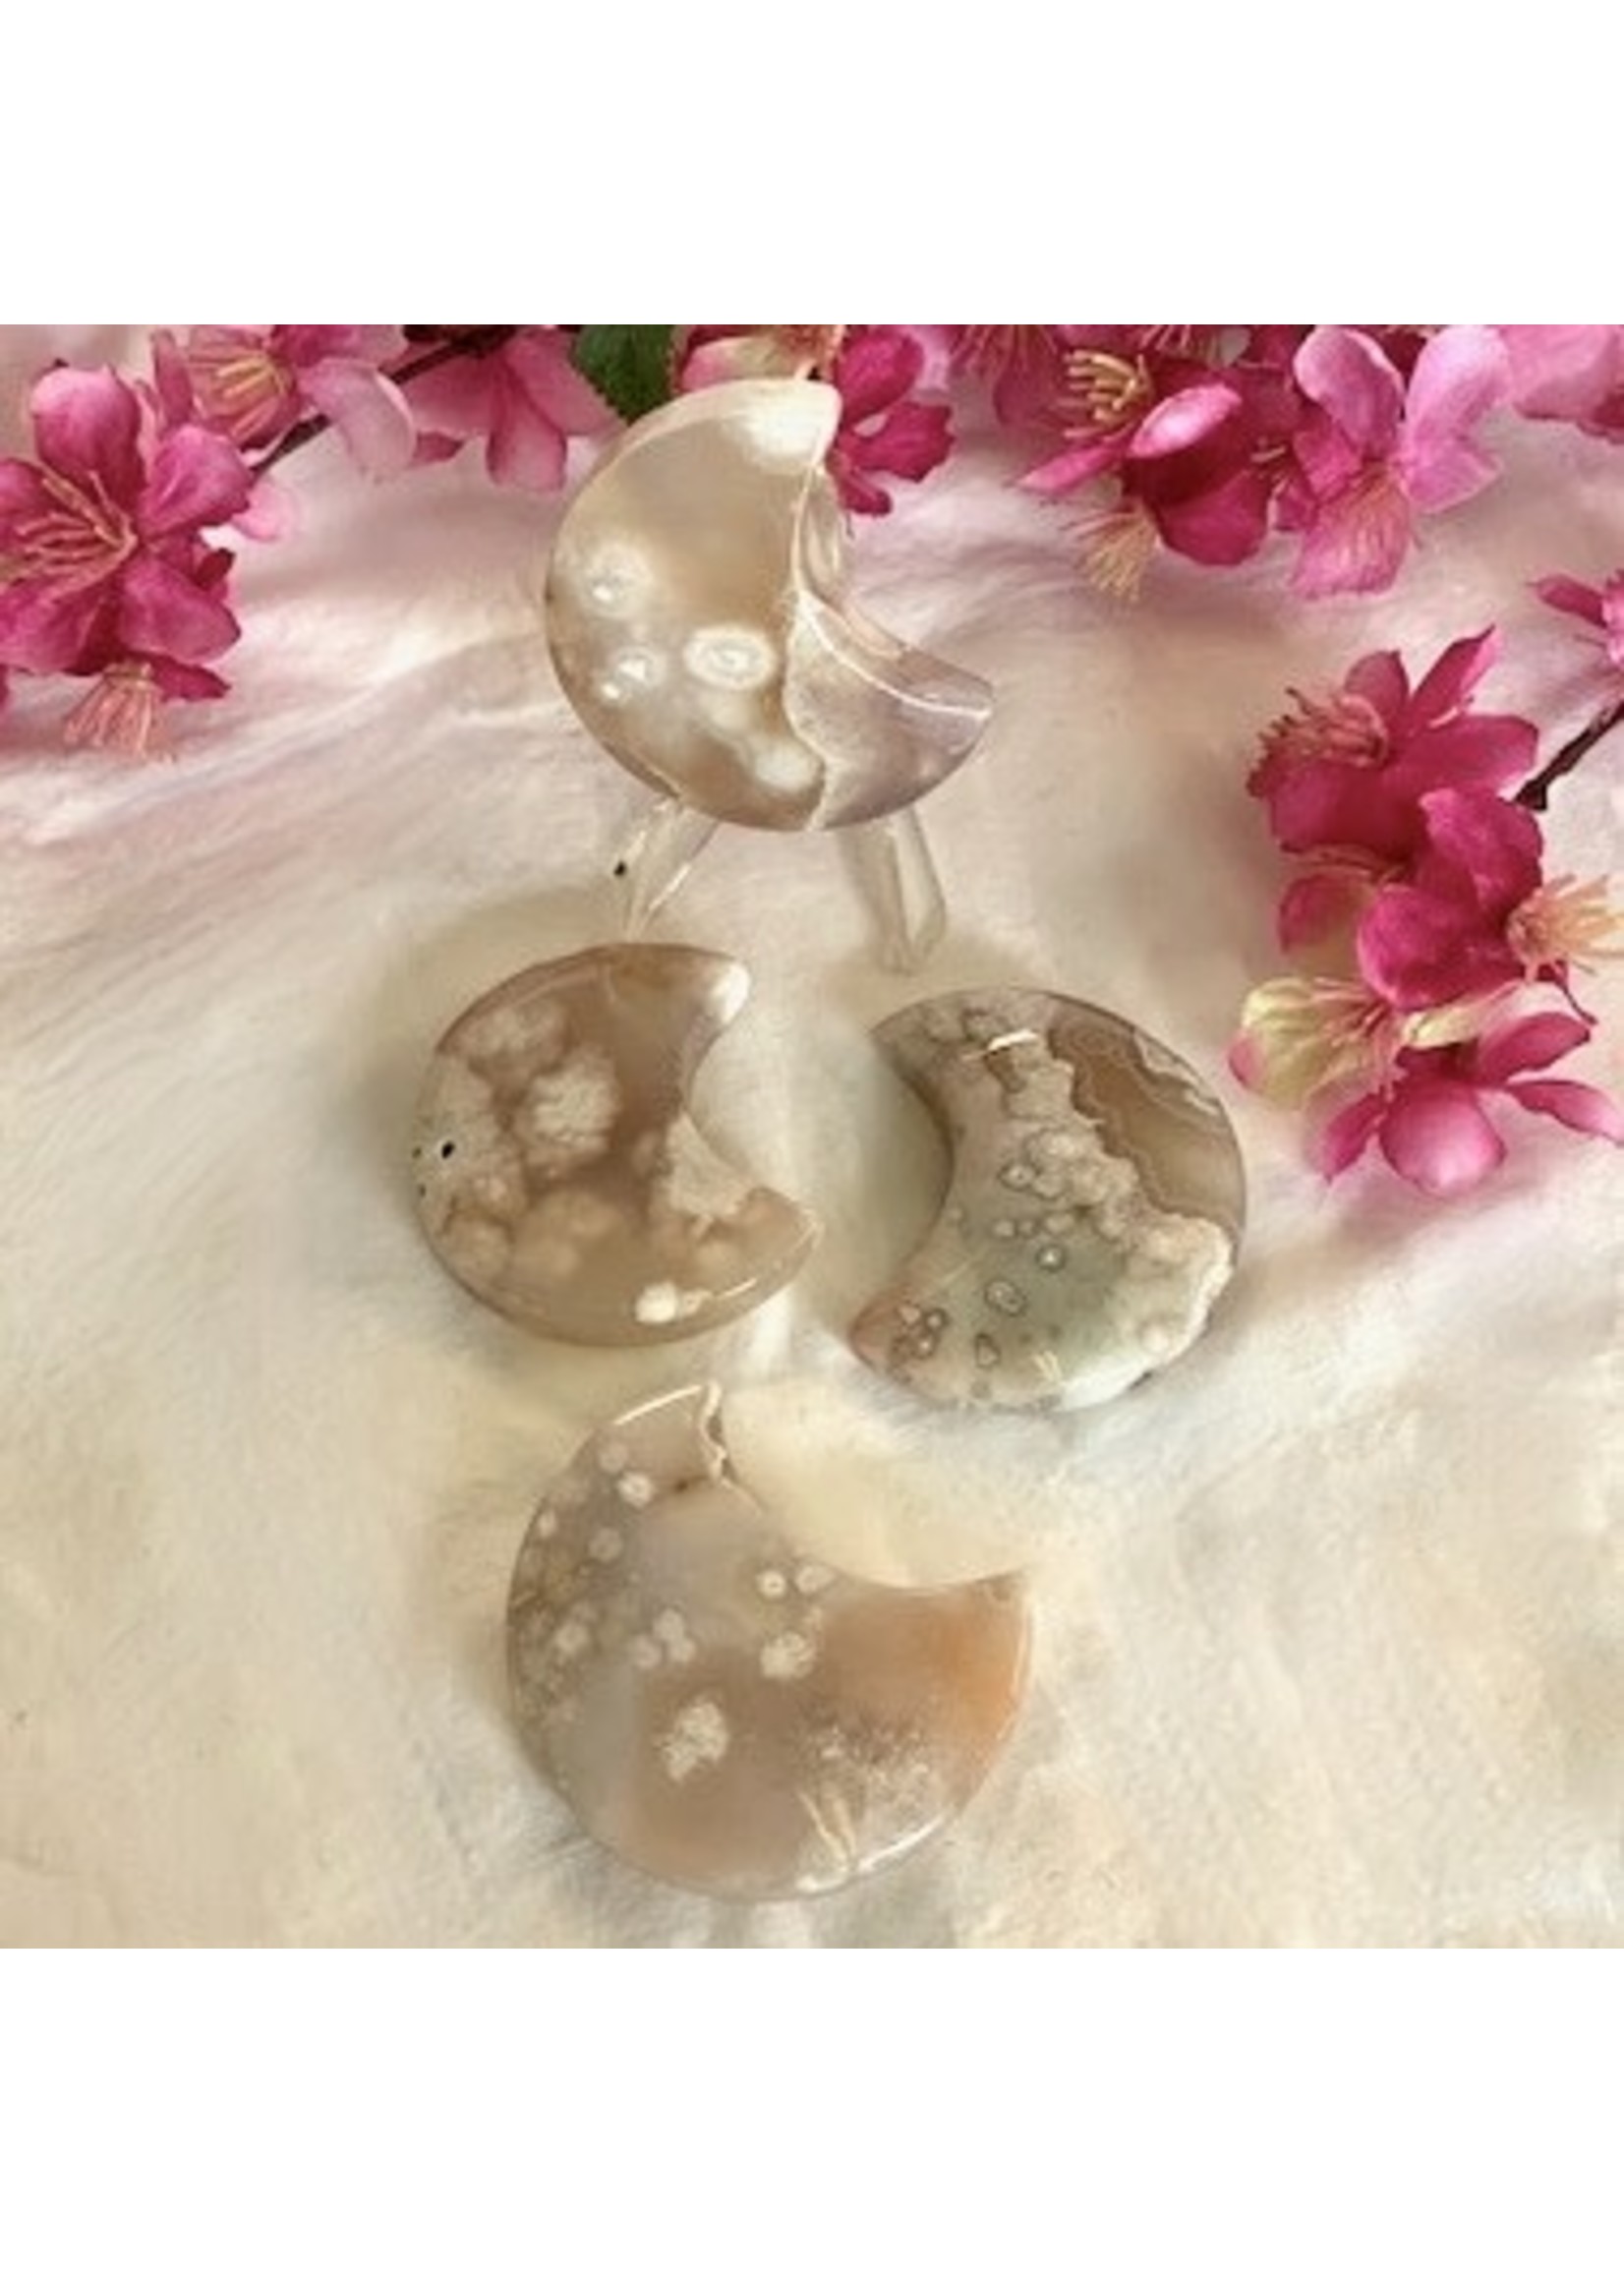 Flower Agate Moons for blossoming into your own power